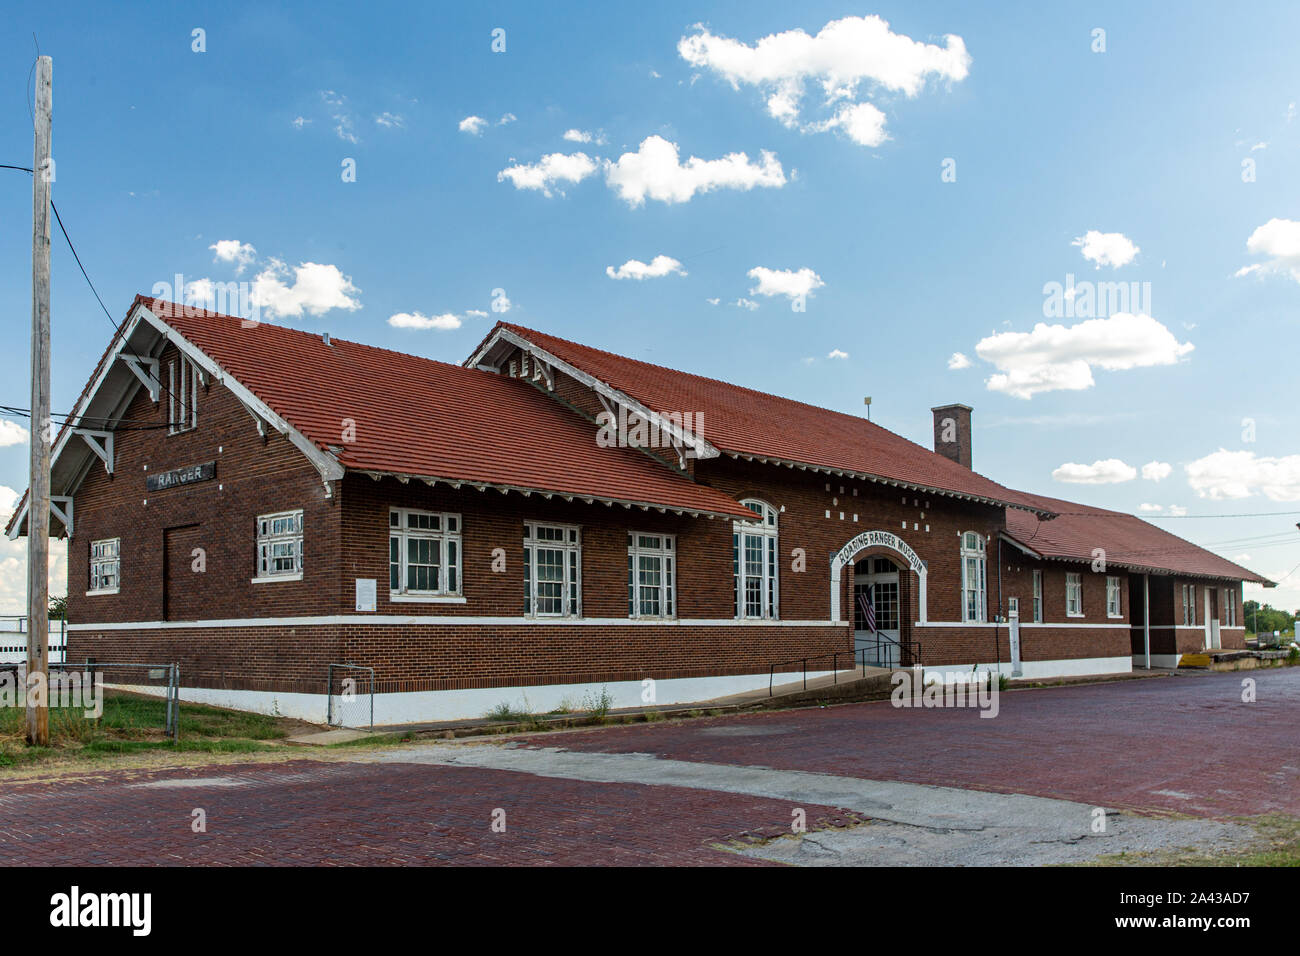 The Texas and Pacific train depot in Ranger, Texas Stock Photo